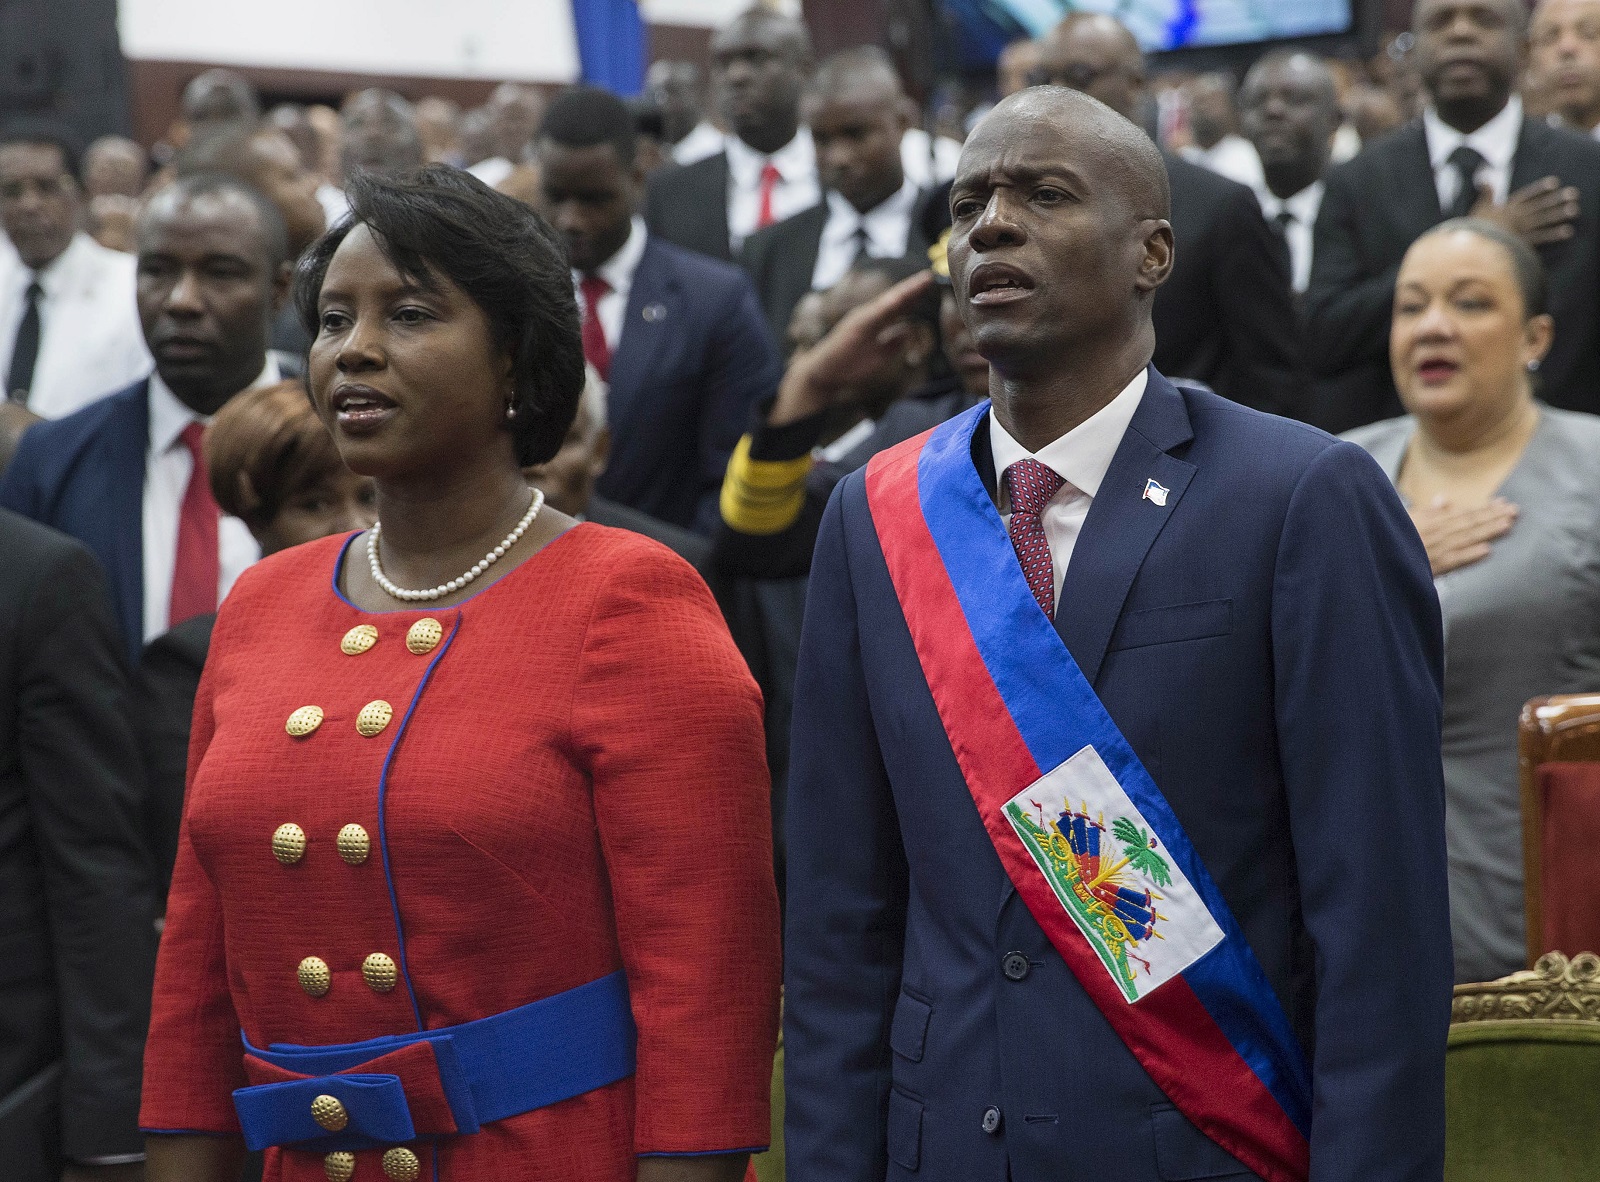 epa09328362 (FILE) - Haitian President Jovenel Moise (R) poses with his wife Martine Marie Etienne Joseph (L), during his investiture ceremony, at Legislative Palace in Poirt-Au-Prince, Haiti, 07 February 2017 (reissued 07 July 2021). According to a statement by Haiti's interim Prime Minister Claude Joseph cited by media, Haiti's President Jovenel Moise has allegedly been killed by a group of unidentified people who had entered his private residence, while his wife Martine was reportedly injured.  EPA/ORLANDO BARRIA *** Local Caption *** 55642594